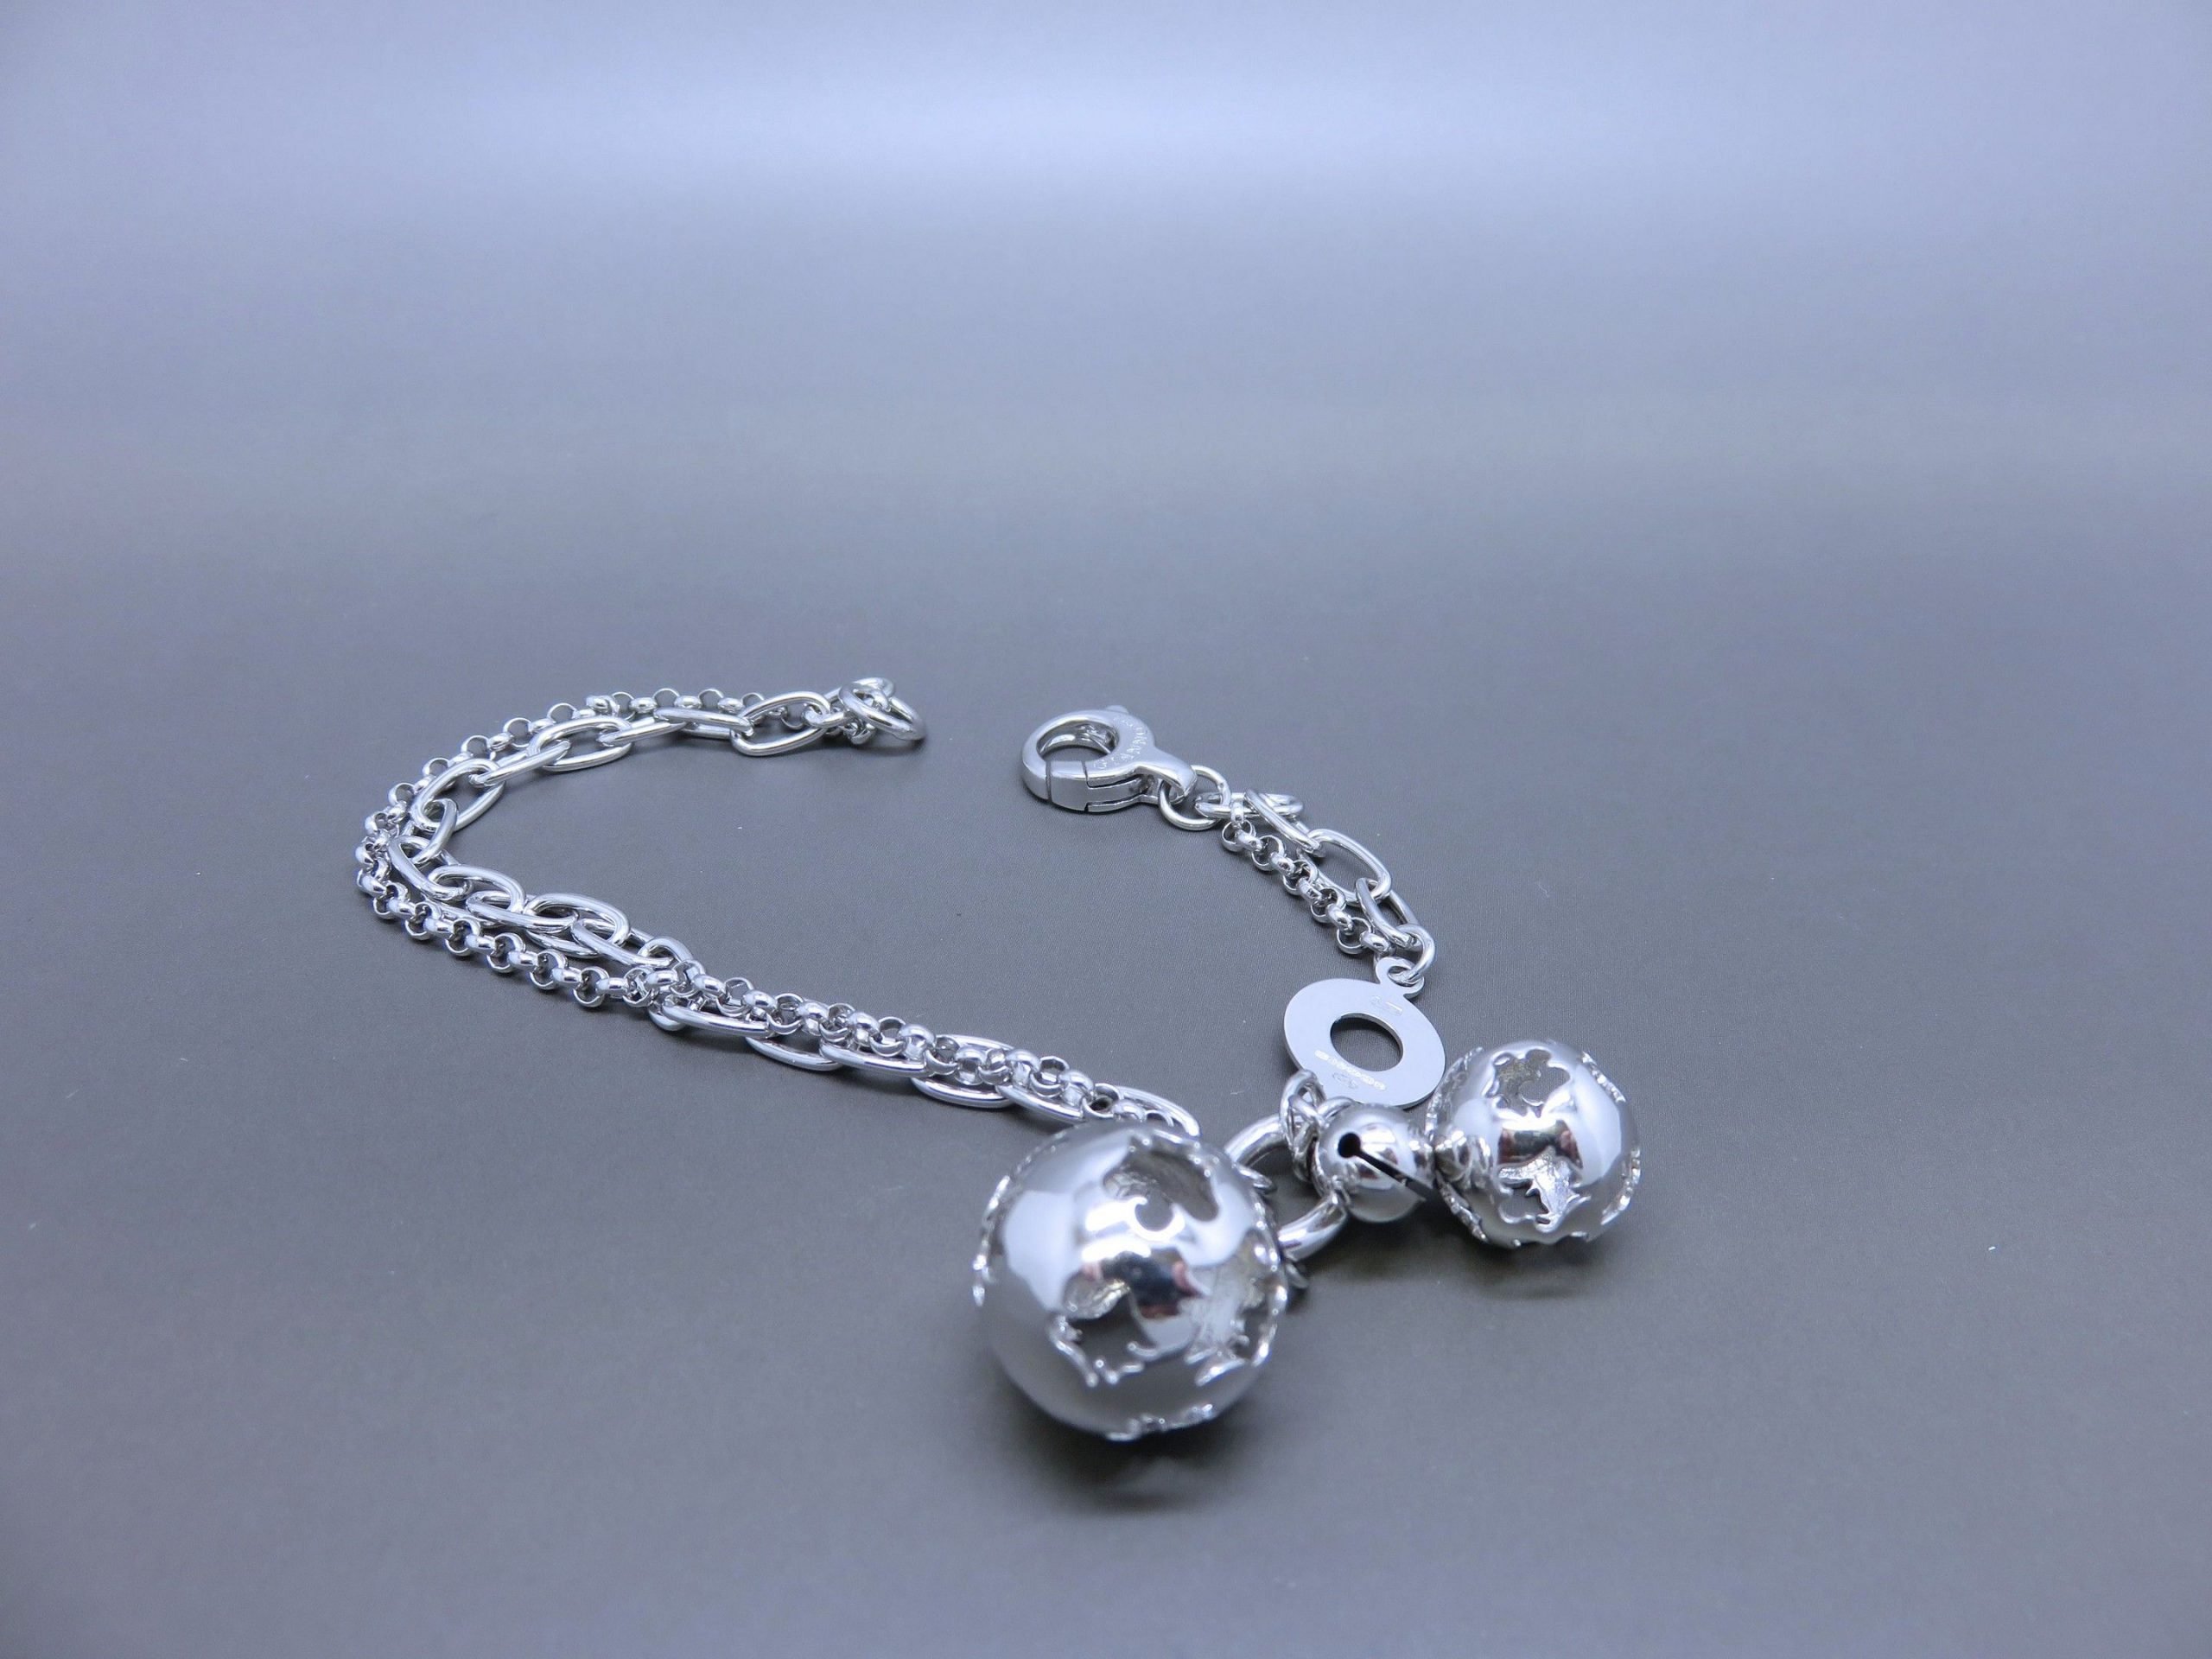 A Sterling Silver bracelet with Charms  1